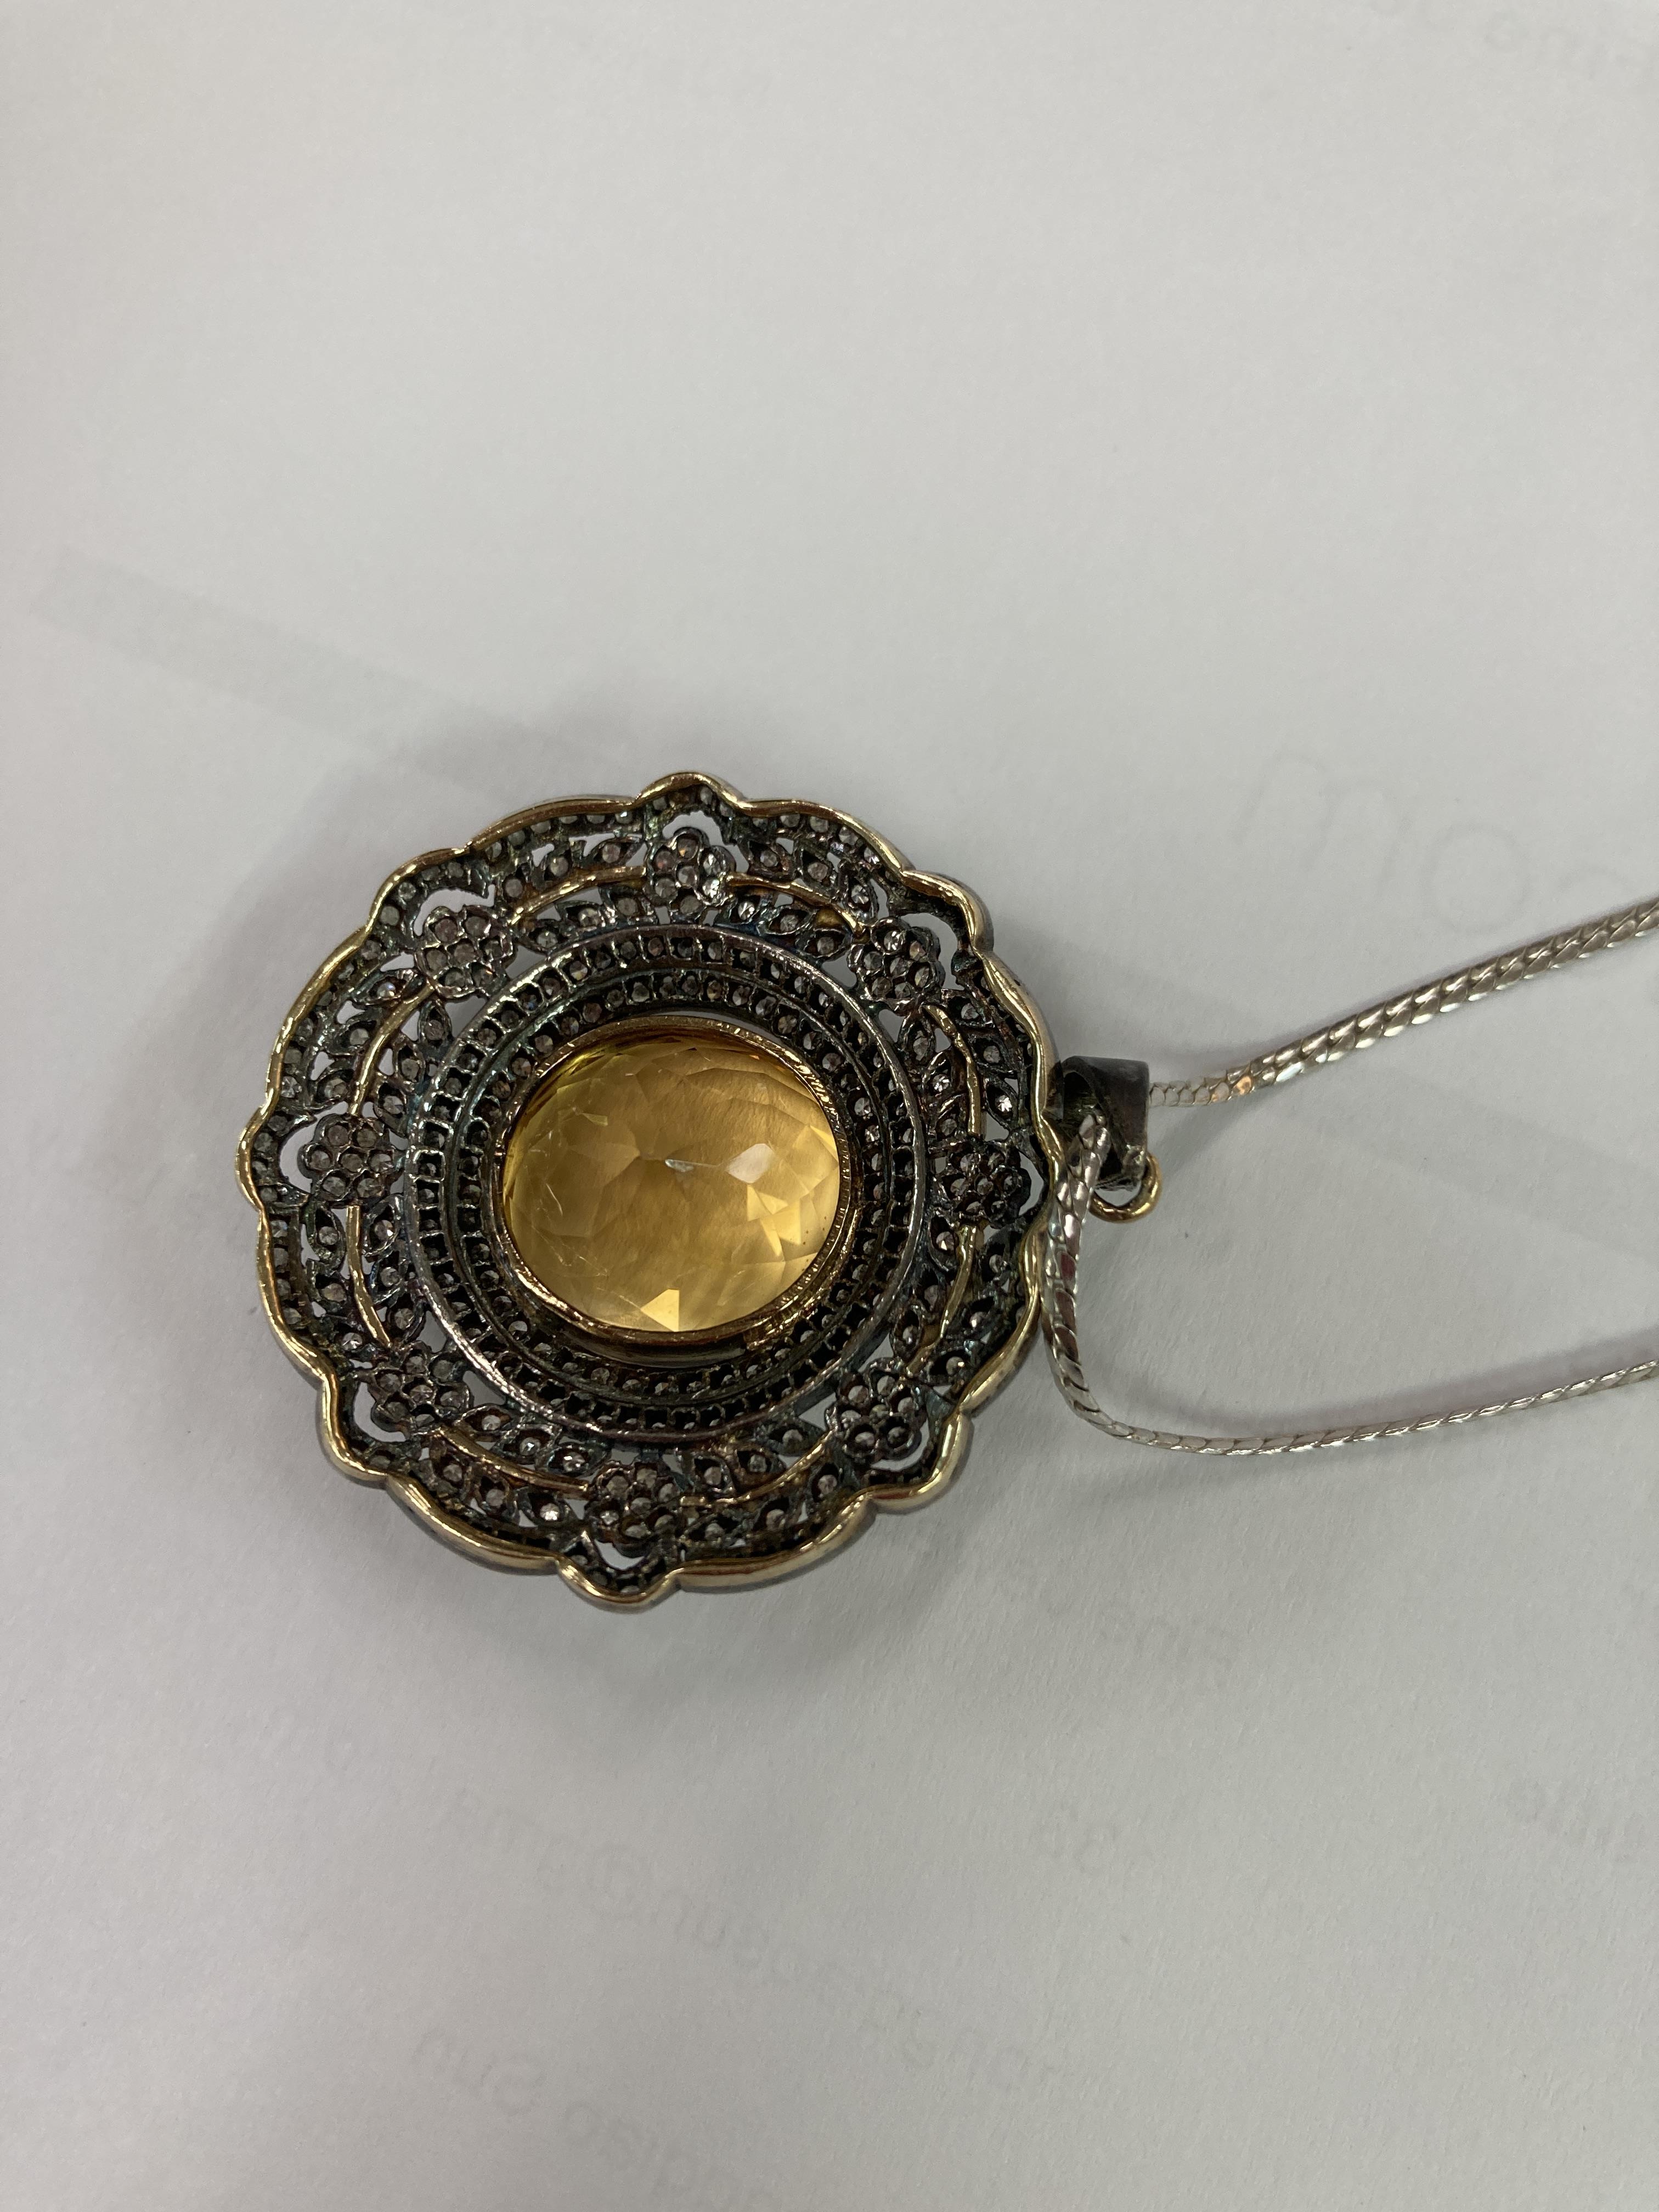 A CITRINE AND DIAMOND PENDANT ON CHAIN - Image 9 of 9